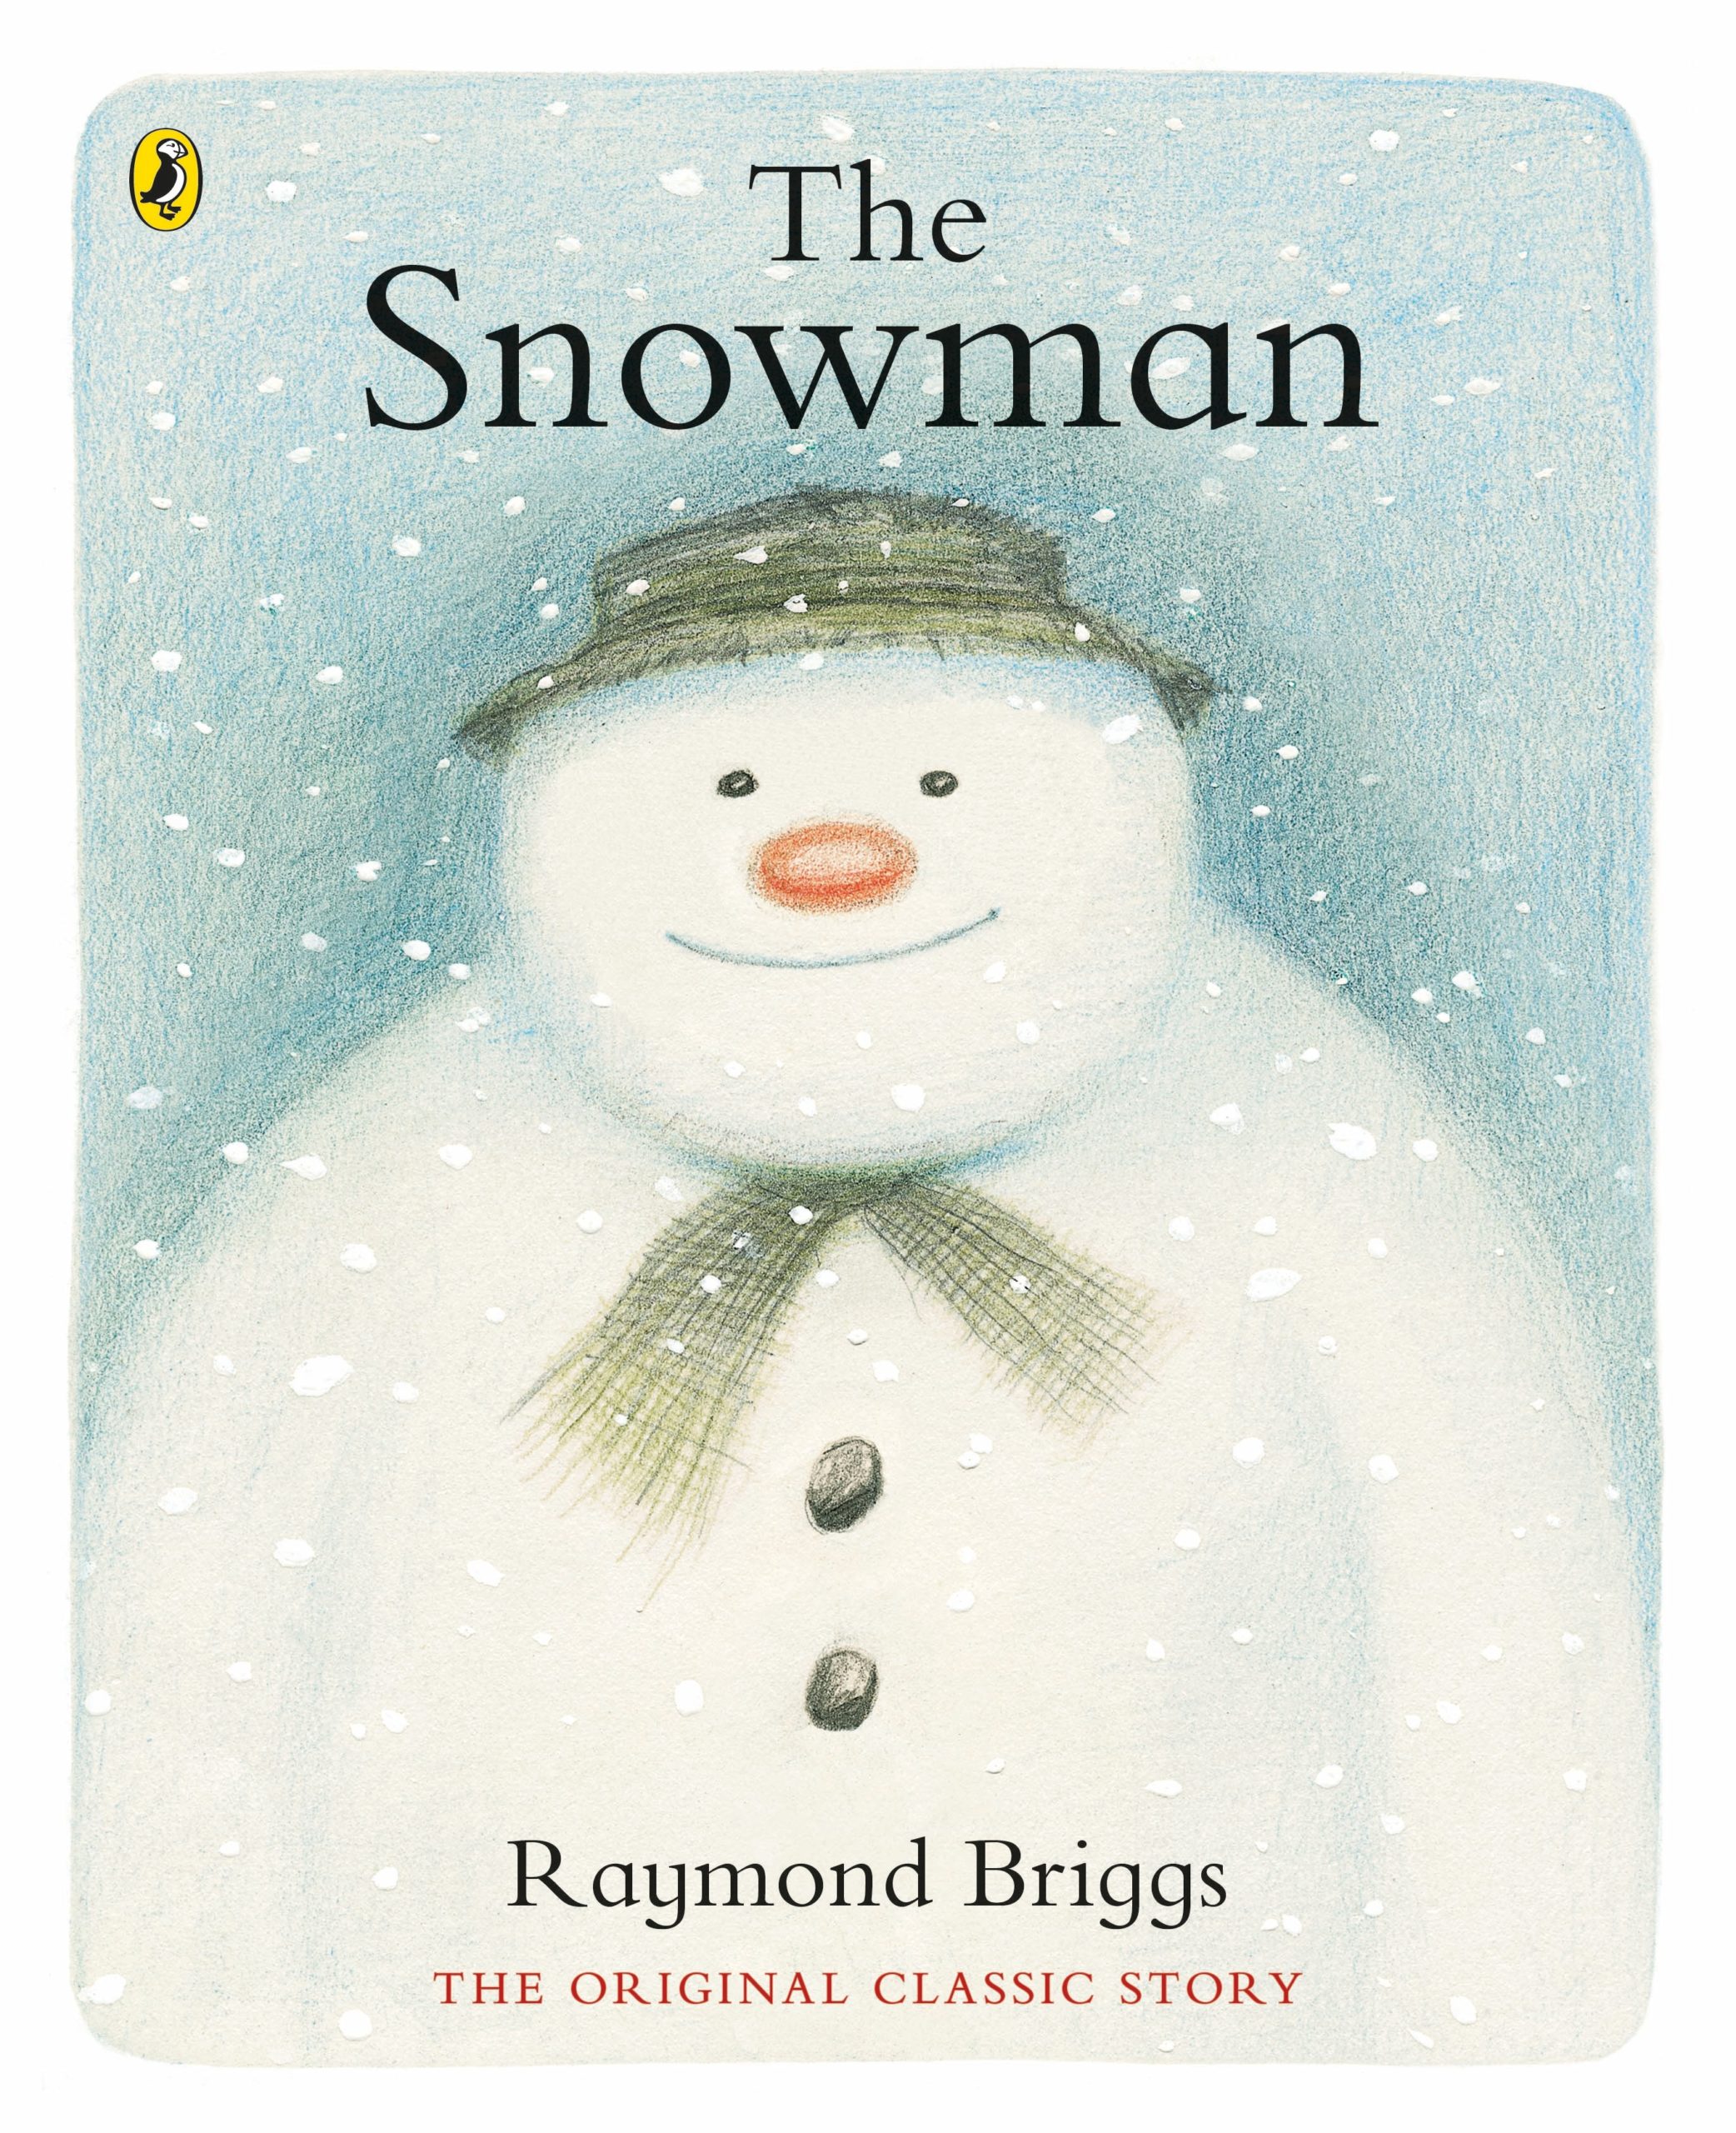 An image of the front cover of The Snowman picture book